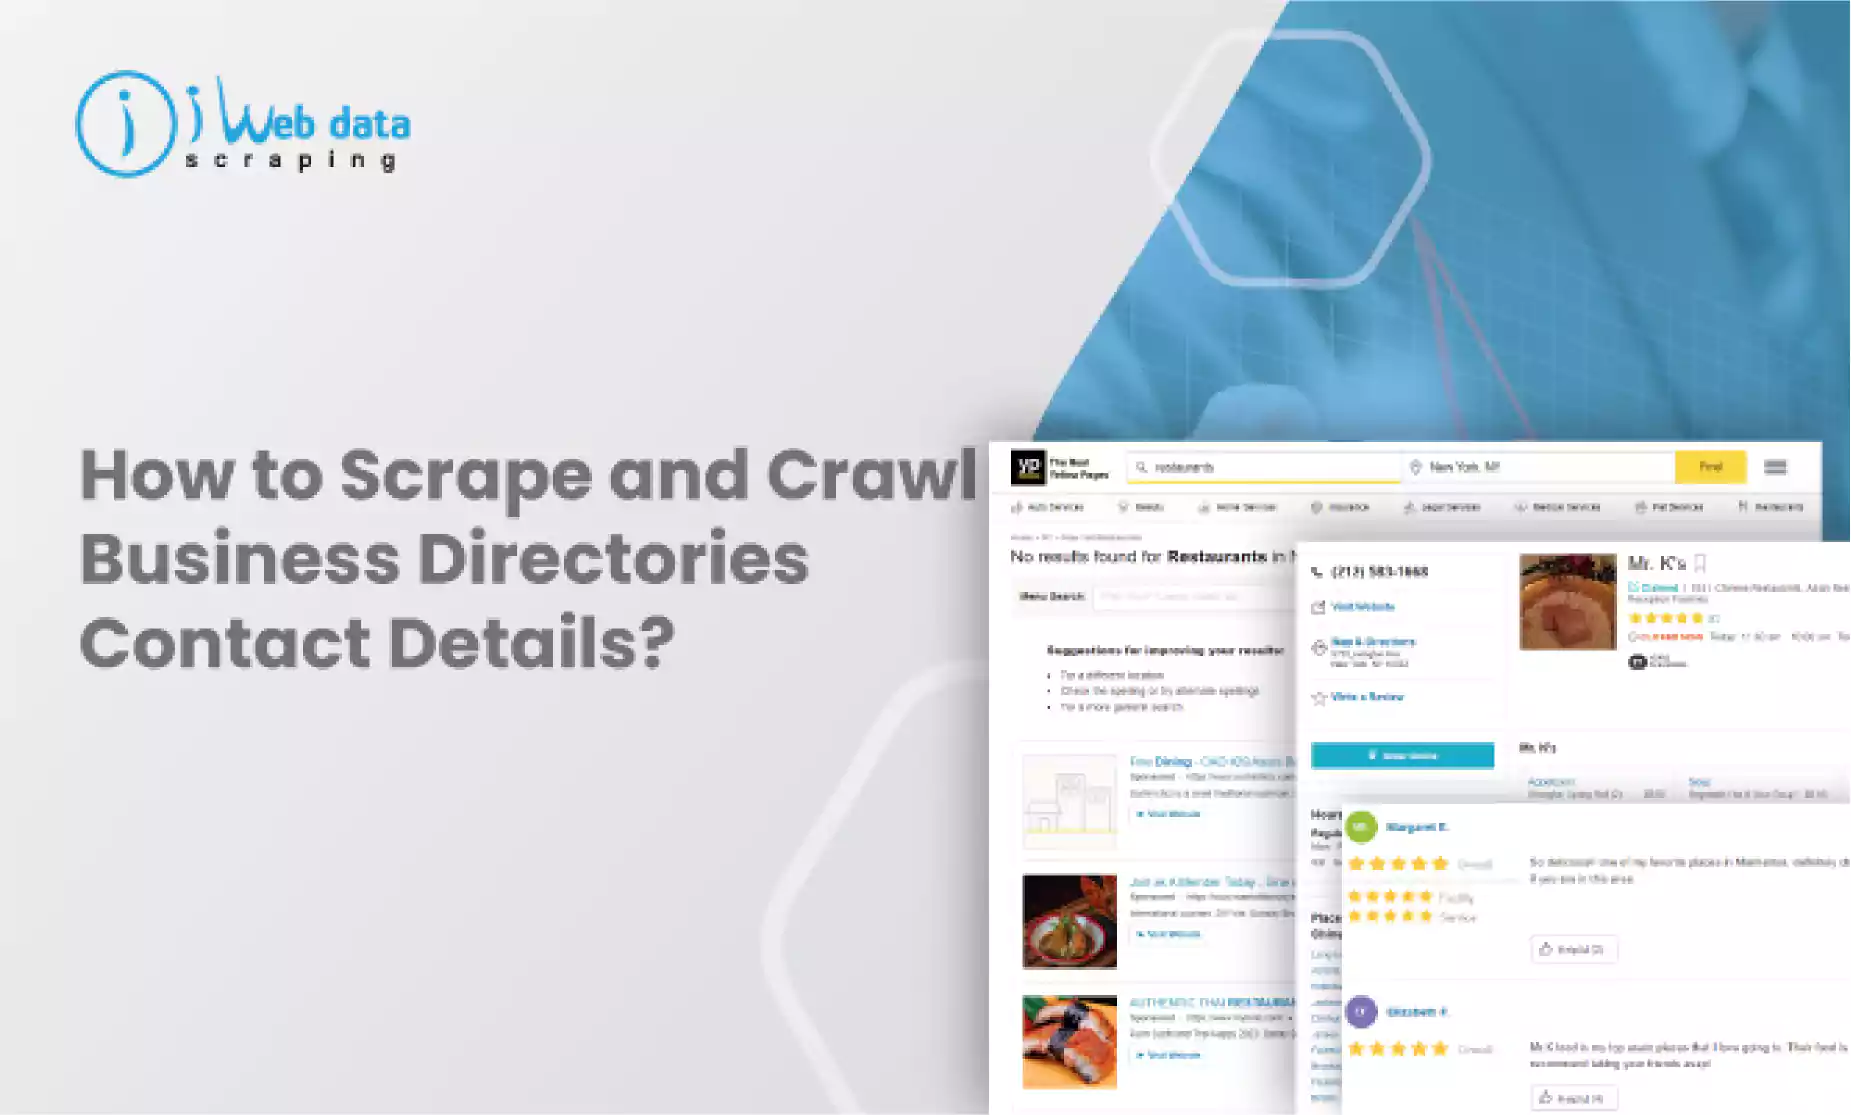 Thumb-How-to-Scrape-and-Crawl-Business-Directories-Contact-Details